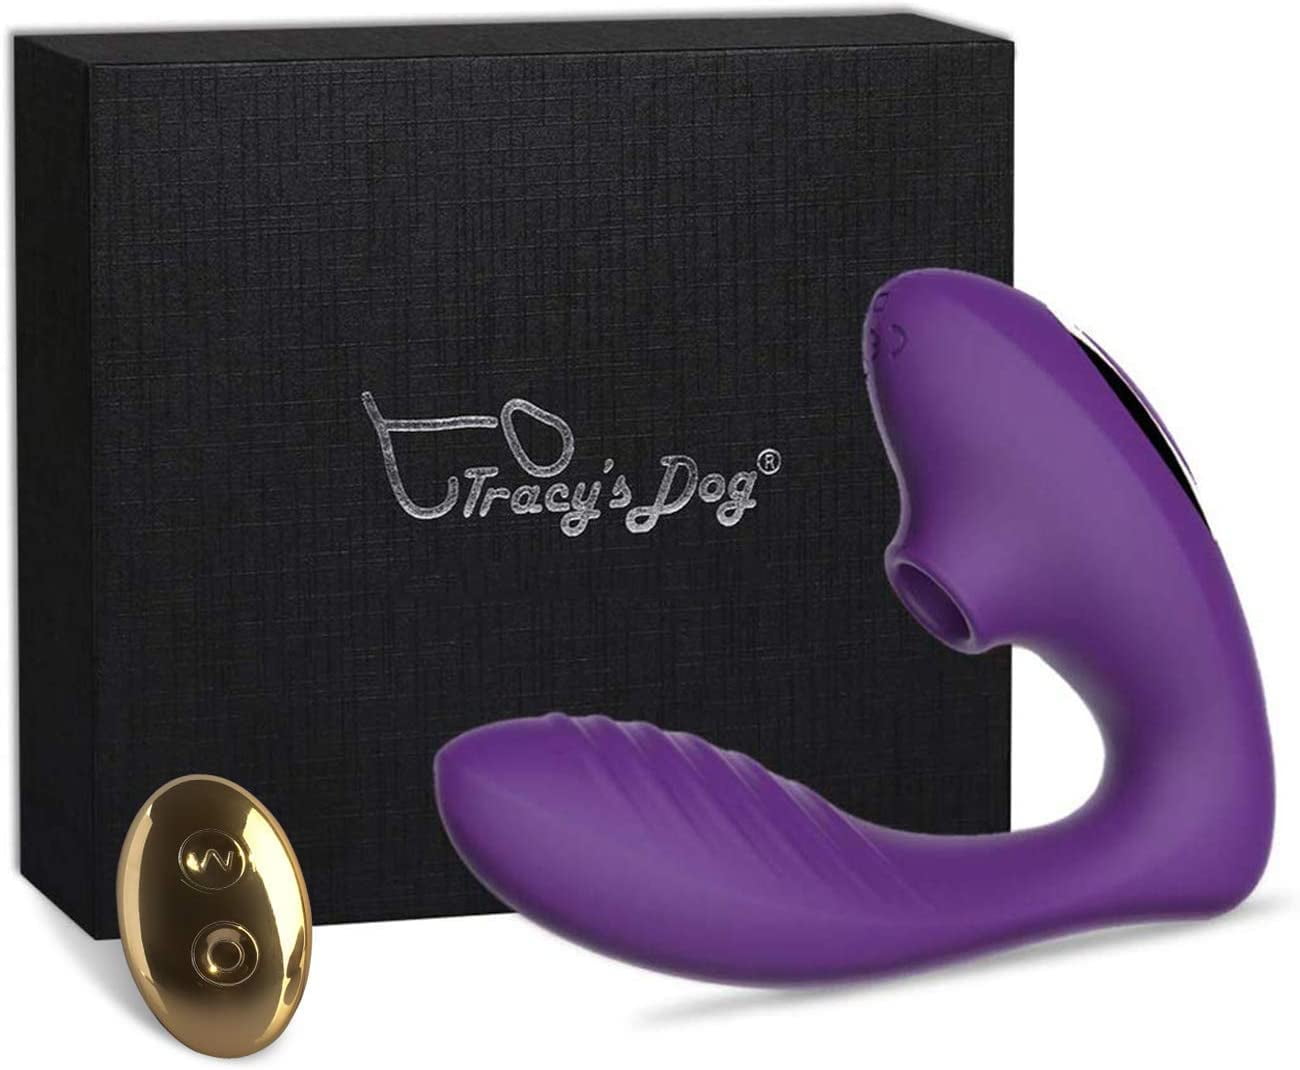 Tracys Dog OG Pro 2 Clitoral Sucking Vibrator for G Spot Clit Stimulator with 10 Suction and Vibration Patterns, Adult Sex Toys for Women, Purple image picture